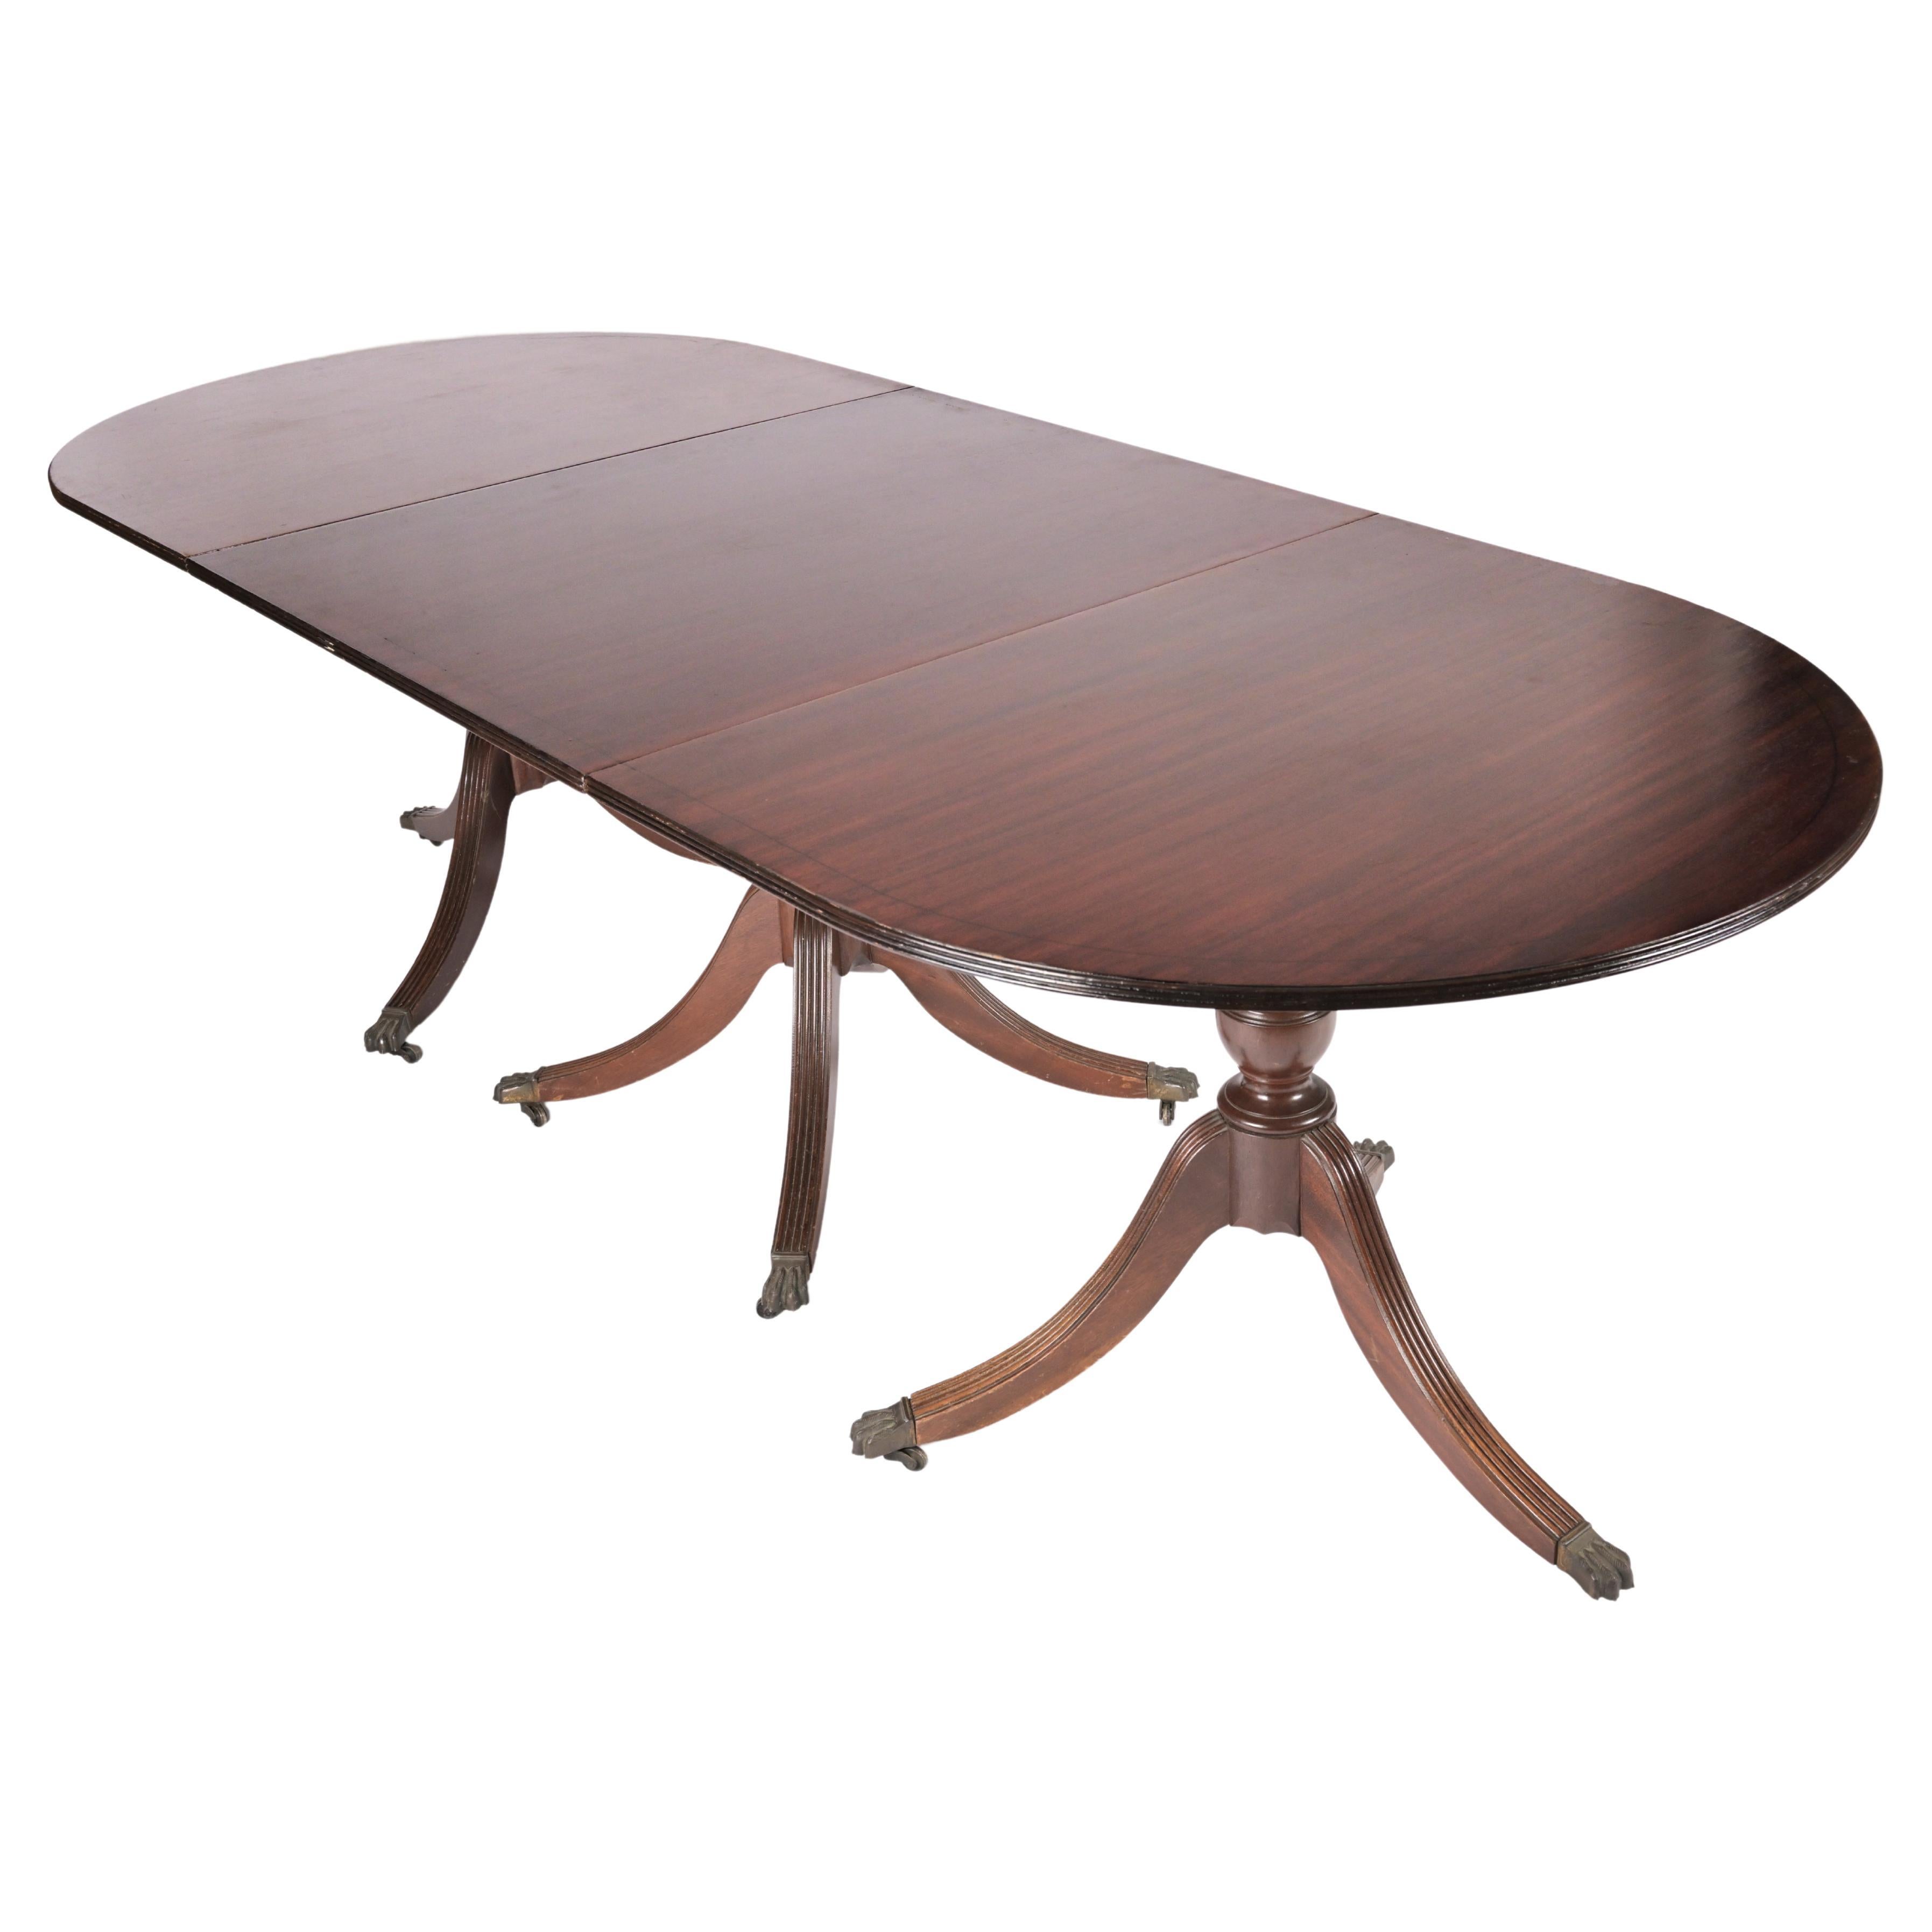 20th Century Sheraton Style Pedestal Base Mahogany Dining Table For Sale